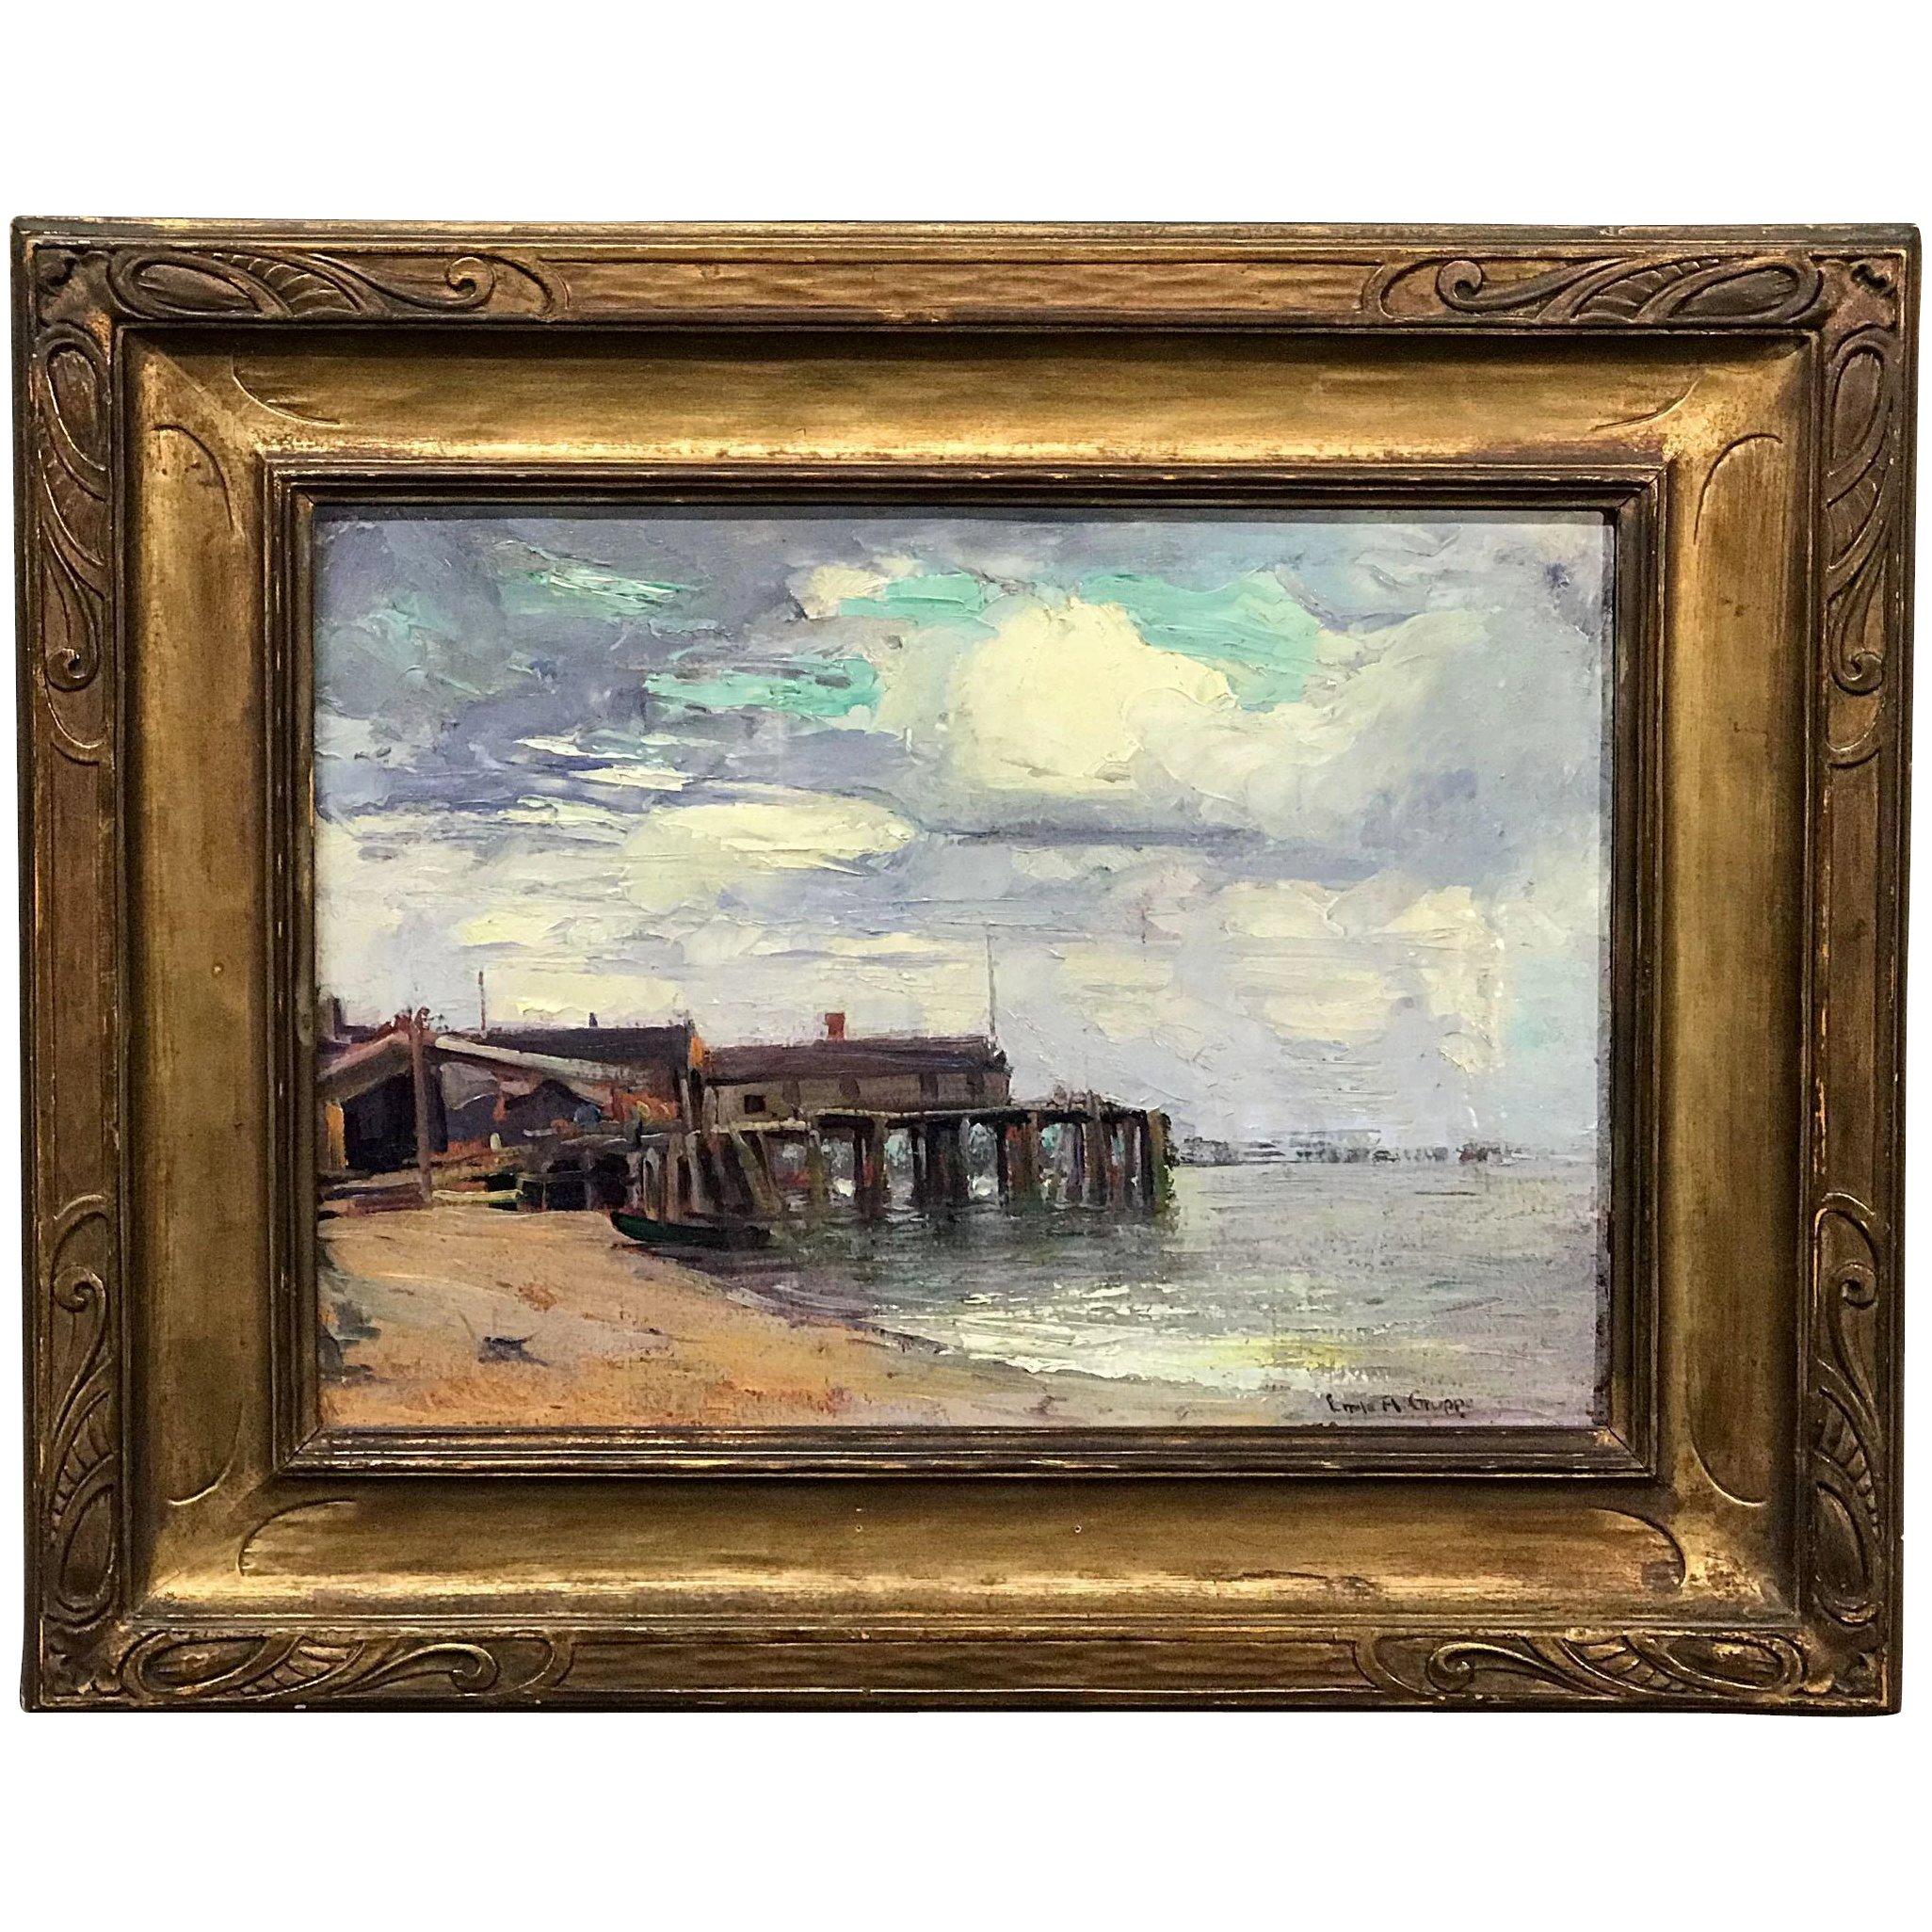 Provincetown Dock - Painting by Emile Albert Gruppe